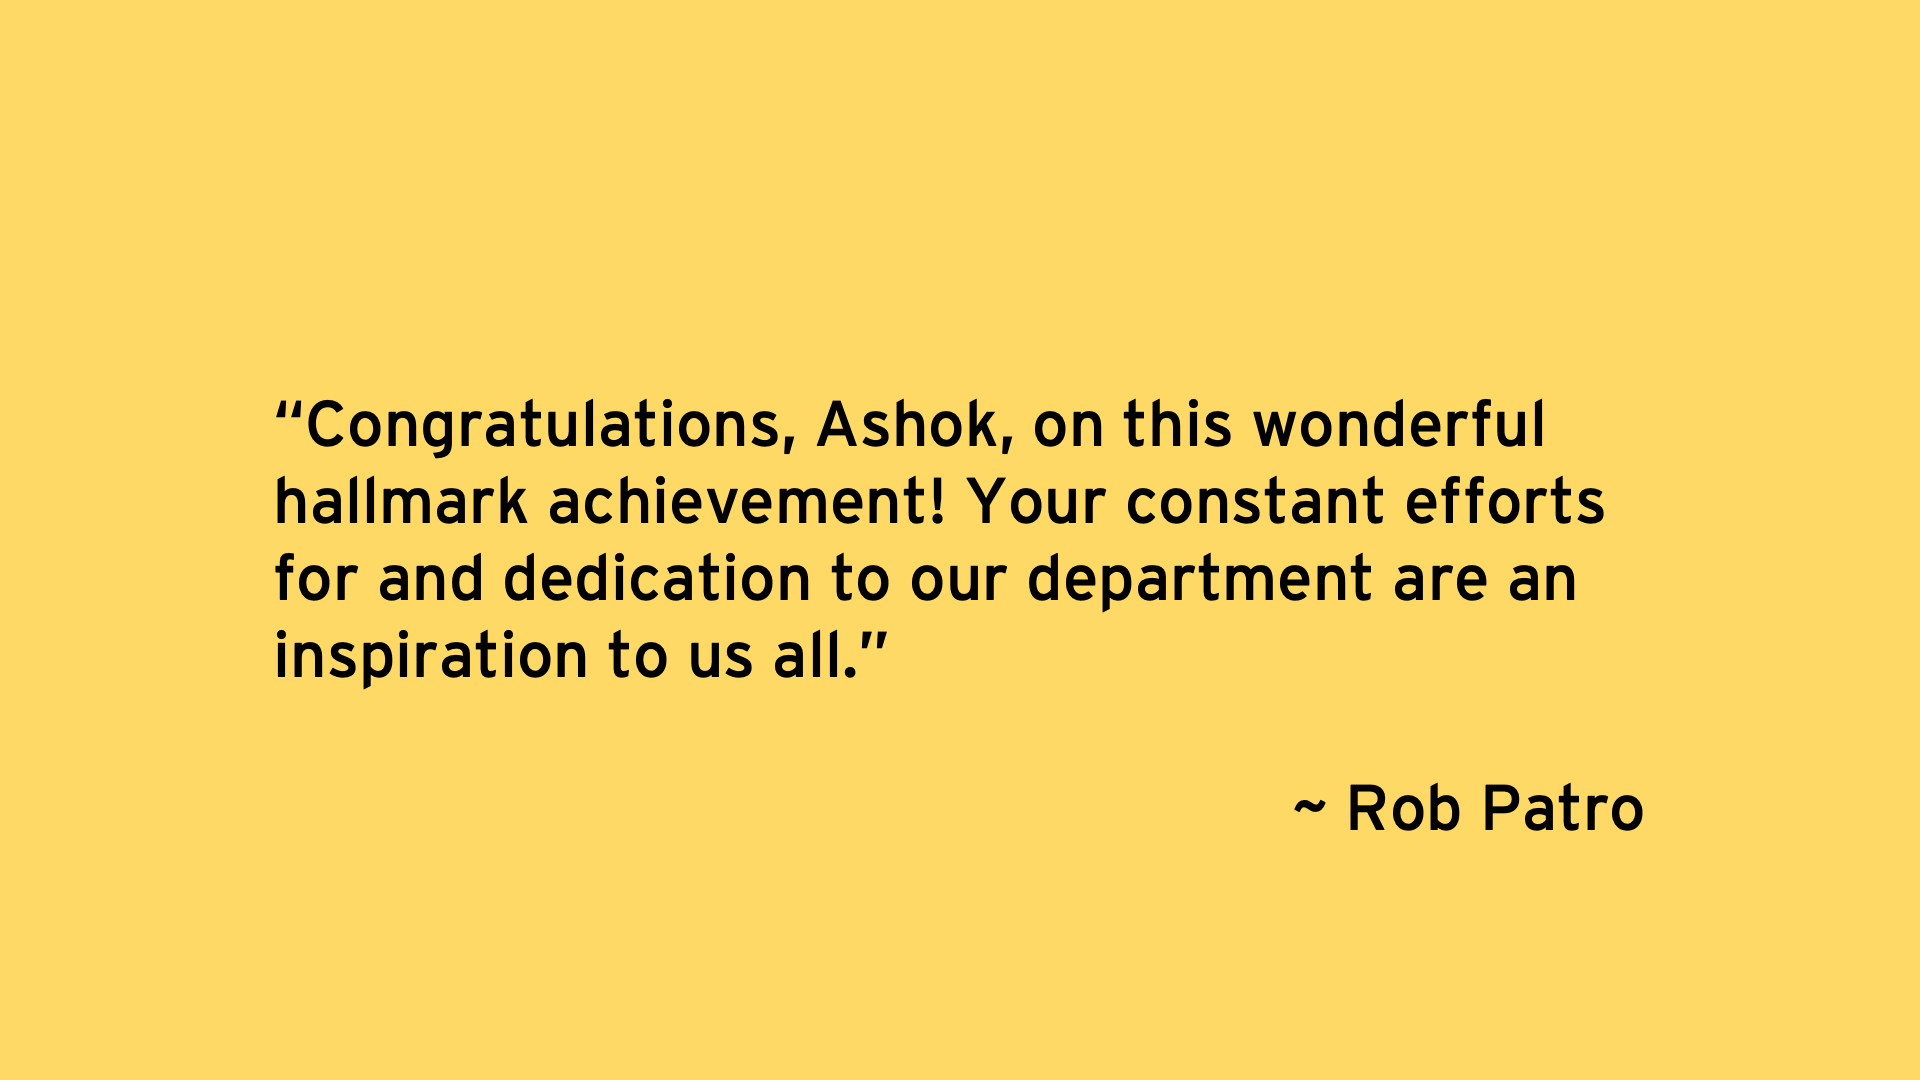 Congratulations, Ashok, on this wonderful hallmark achievement! Your constant efforts for and dedication to our department are an inspiration to us all. - Rob Patro